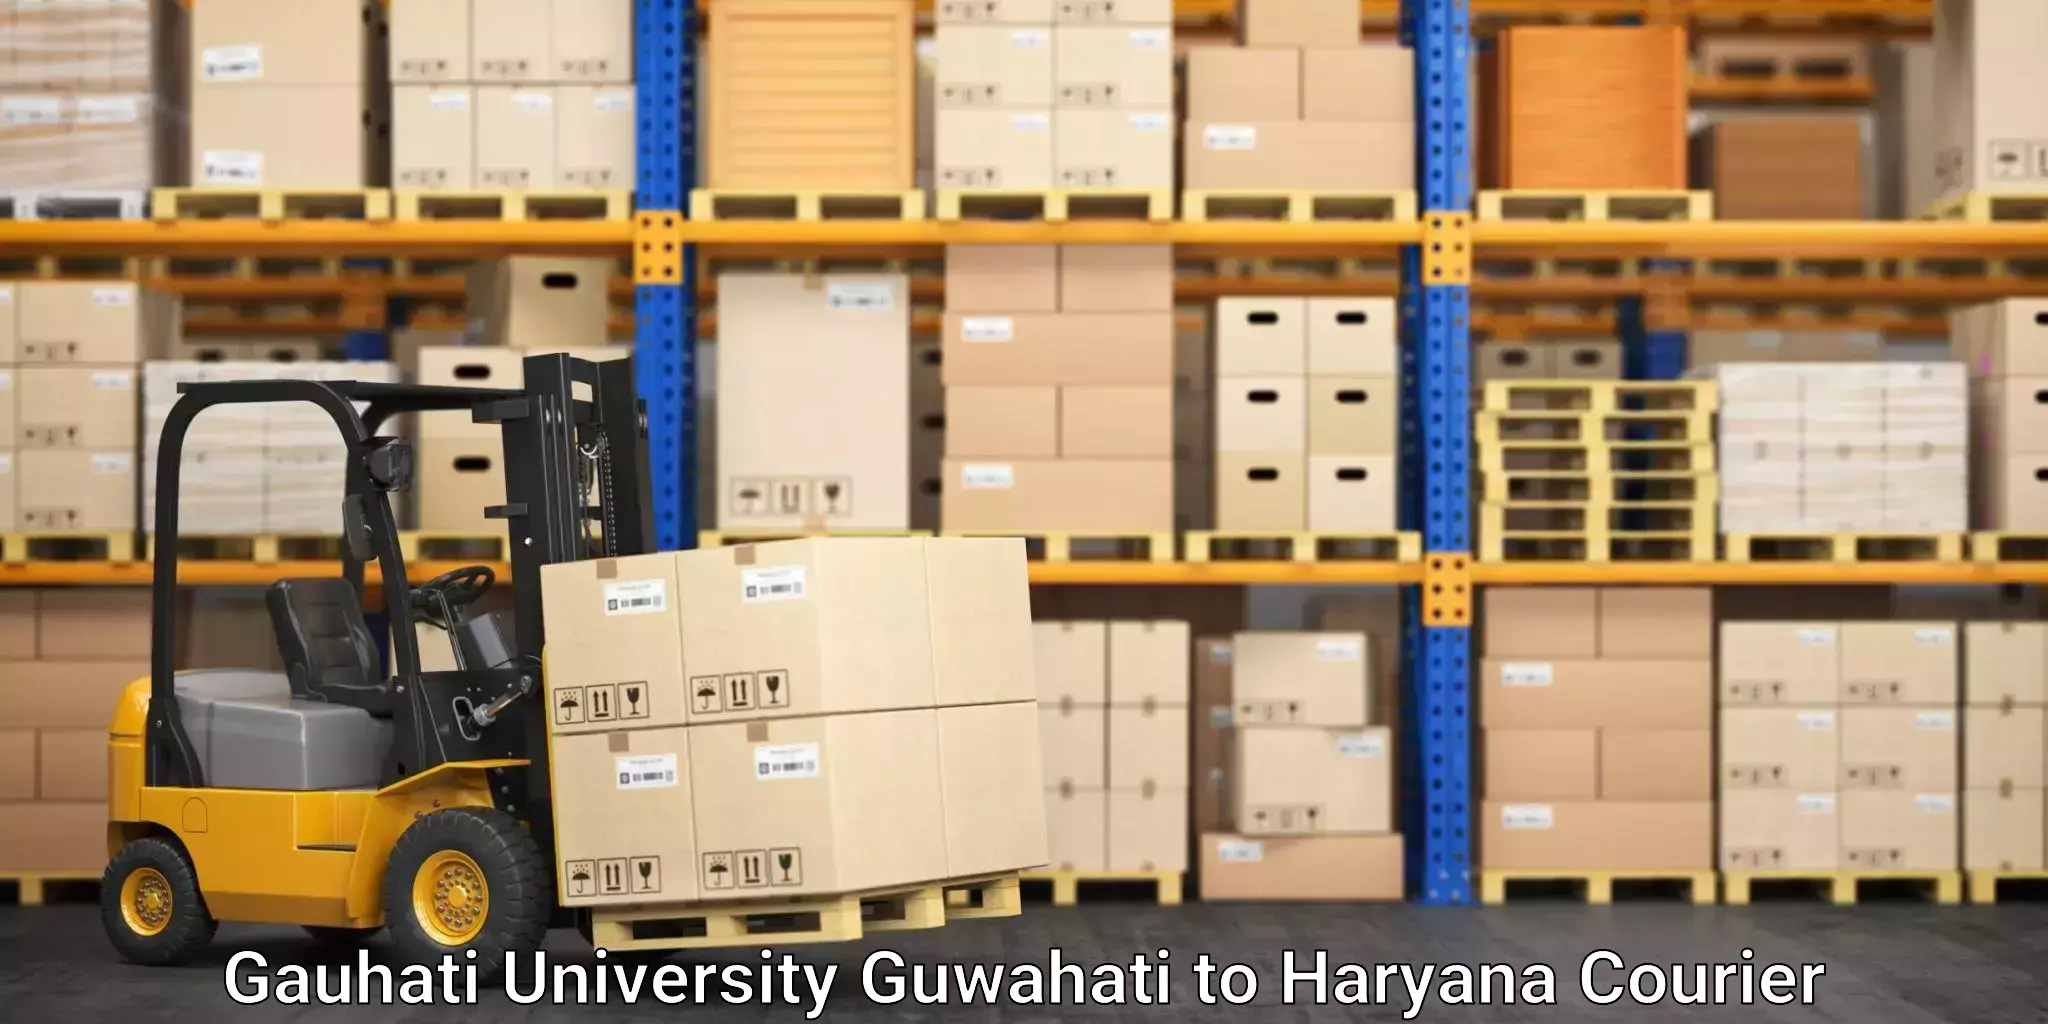 Reliable parcel services Gauhati University Guwahati to Assandh